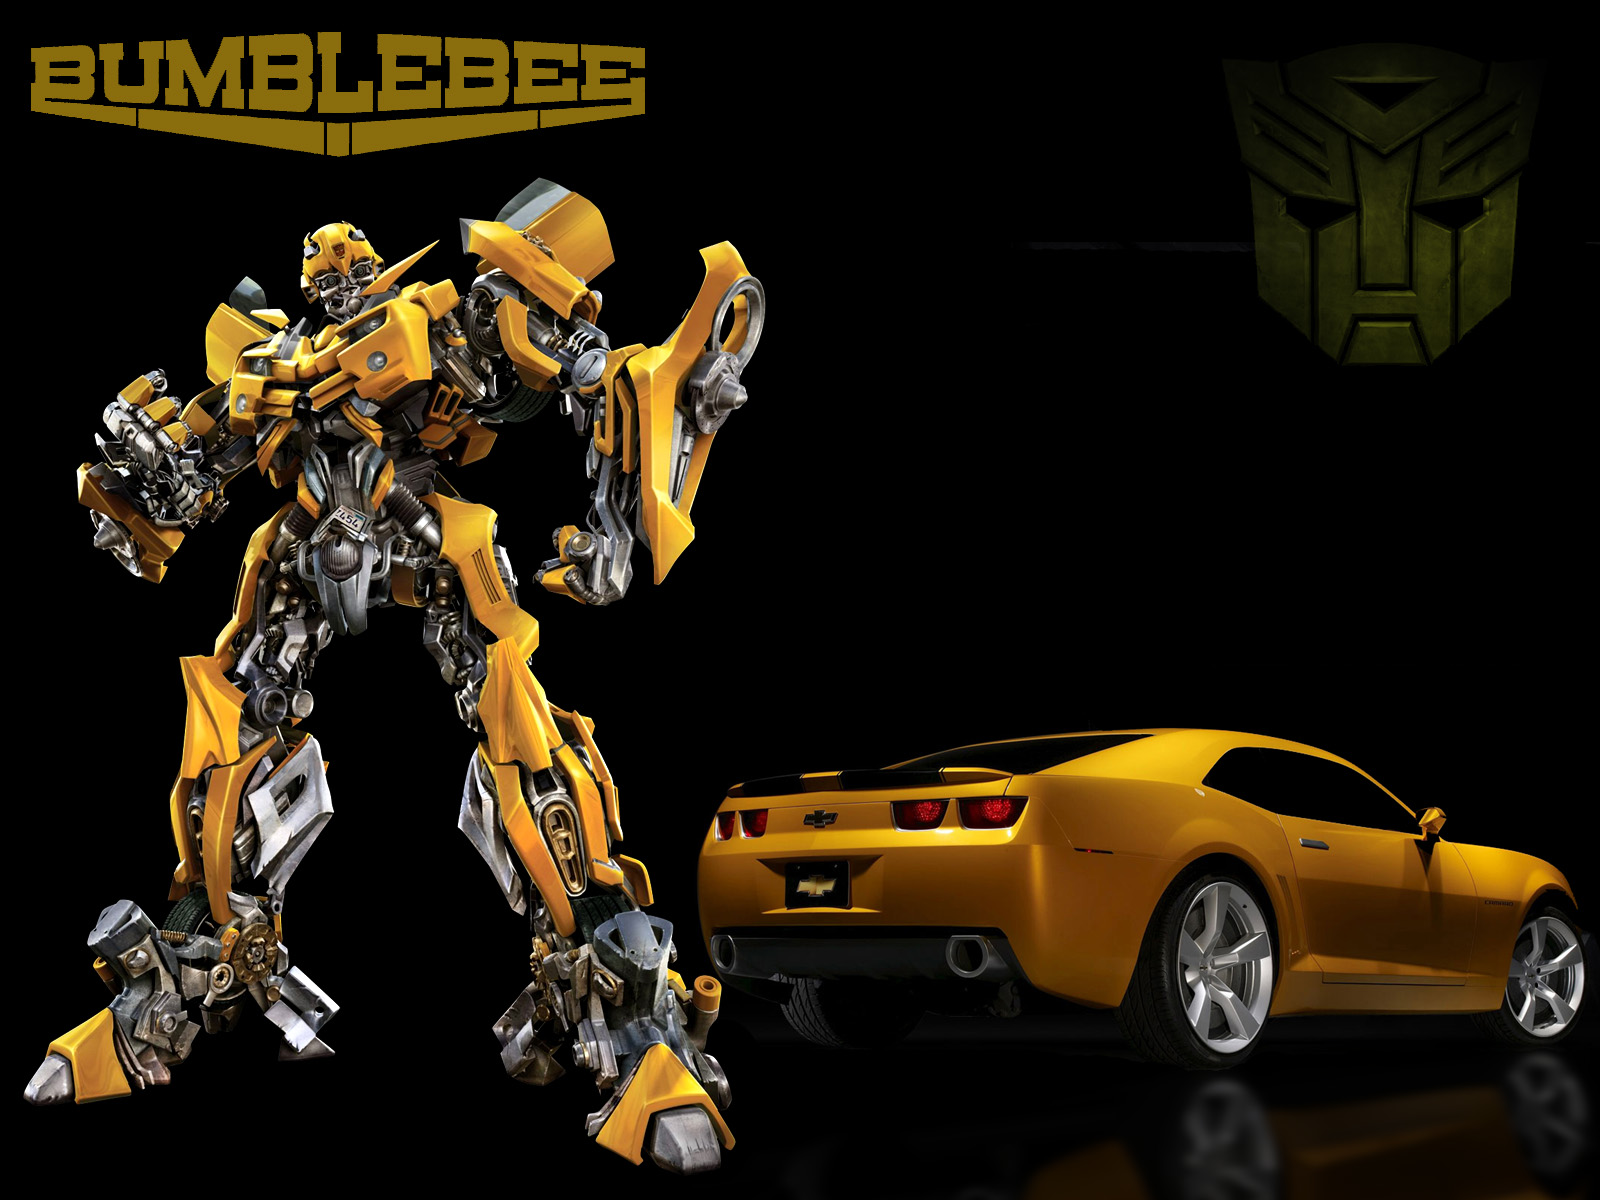 Download Transformers Full Movie